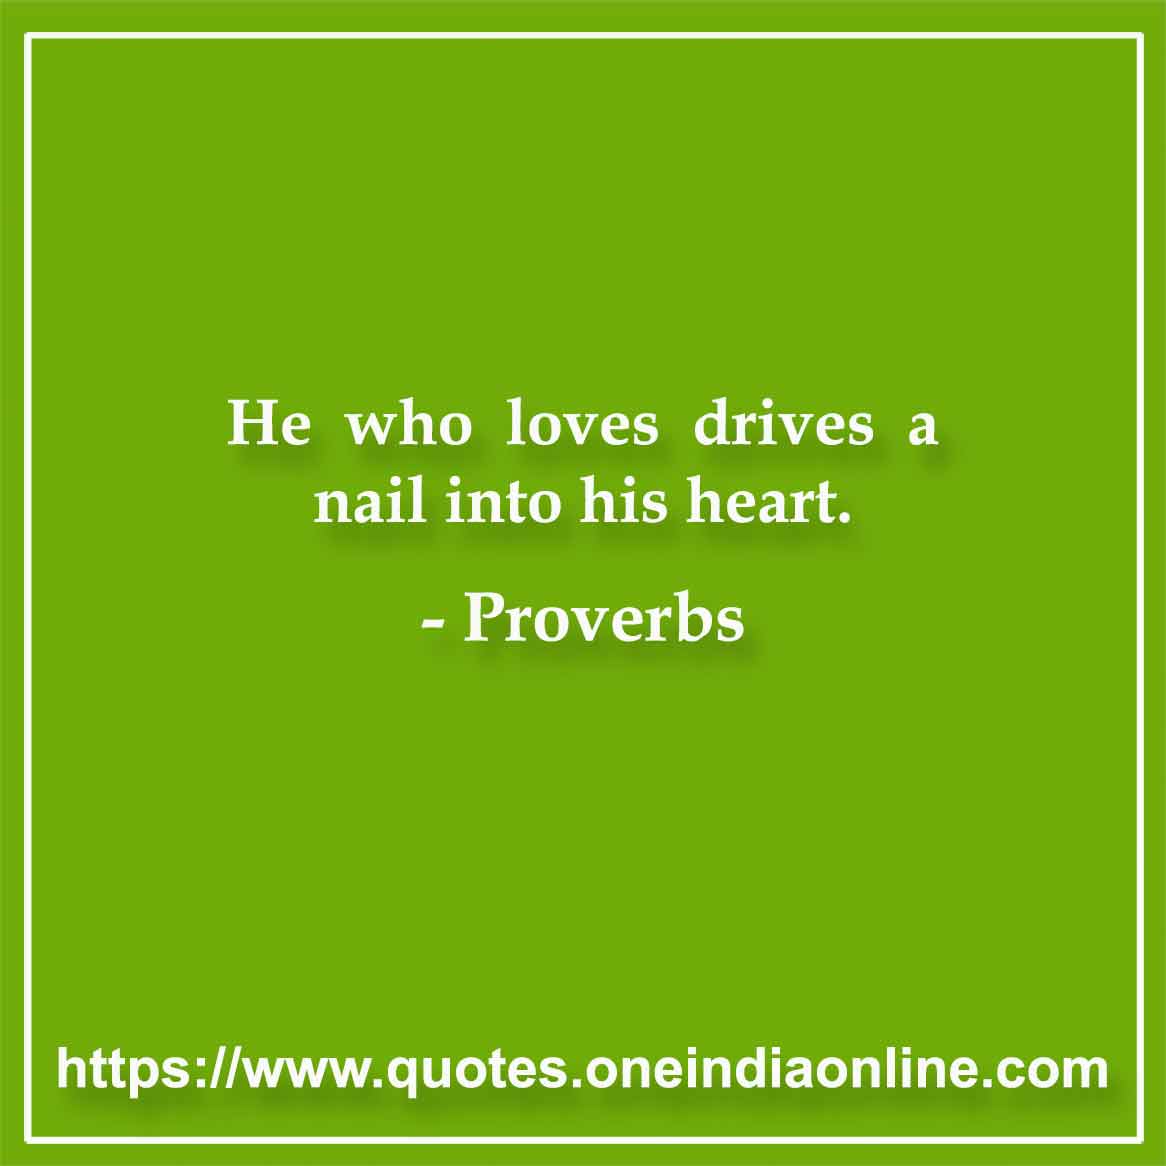 He who loves drives a nail into his heart.

Indian Proverbs